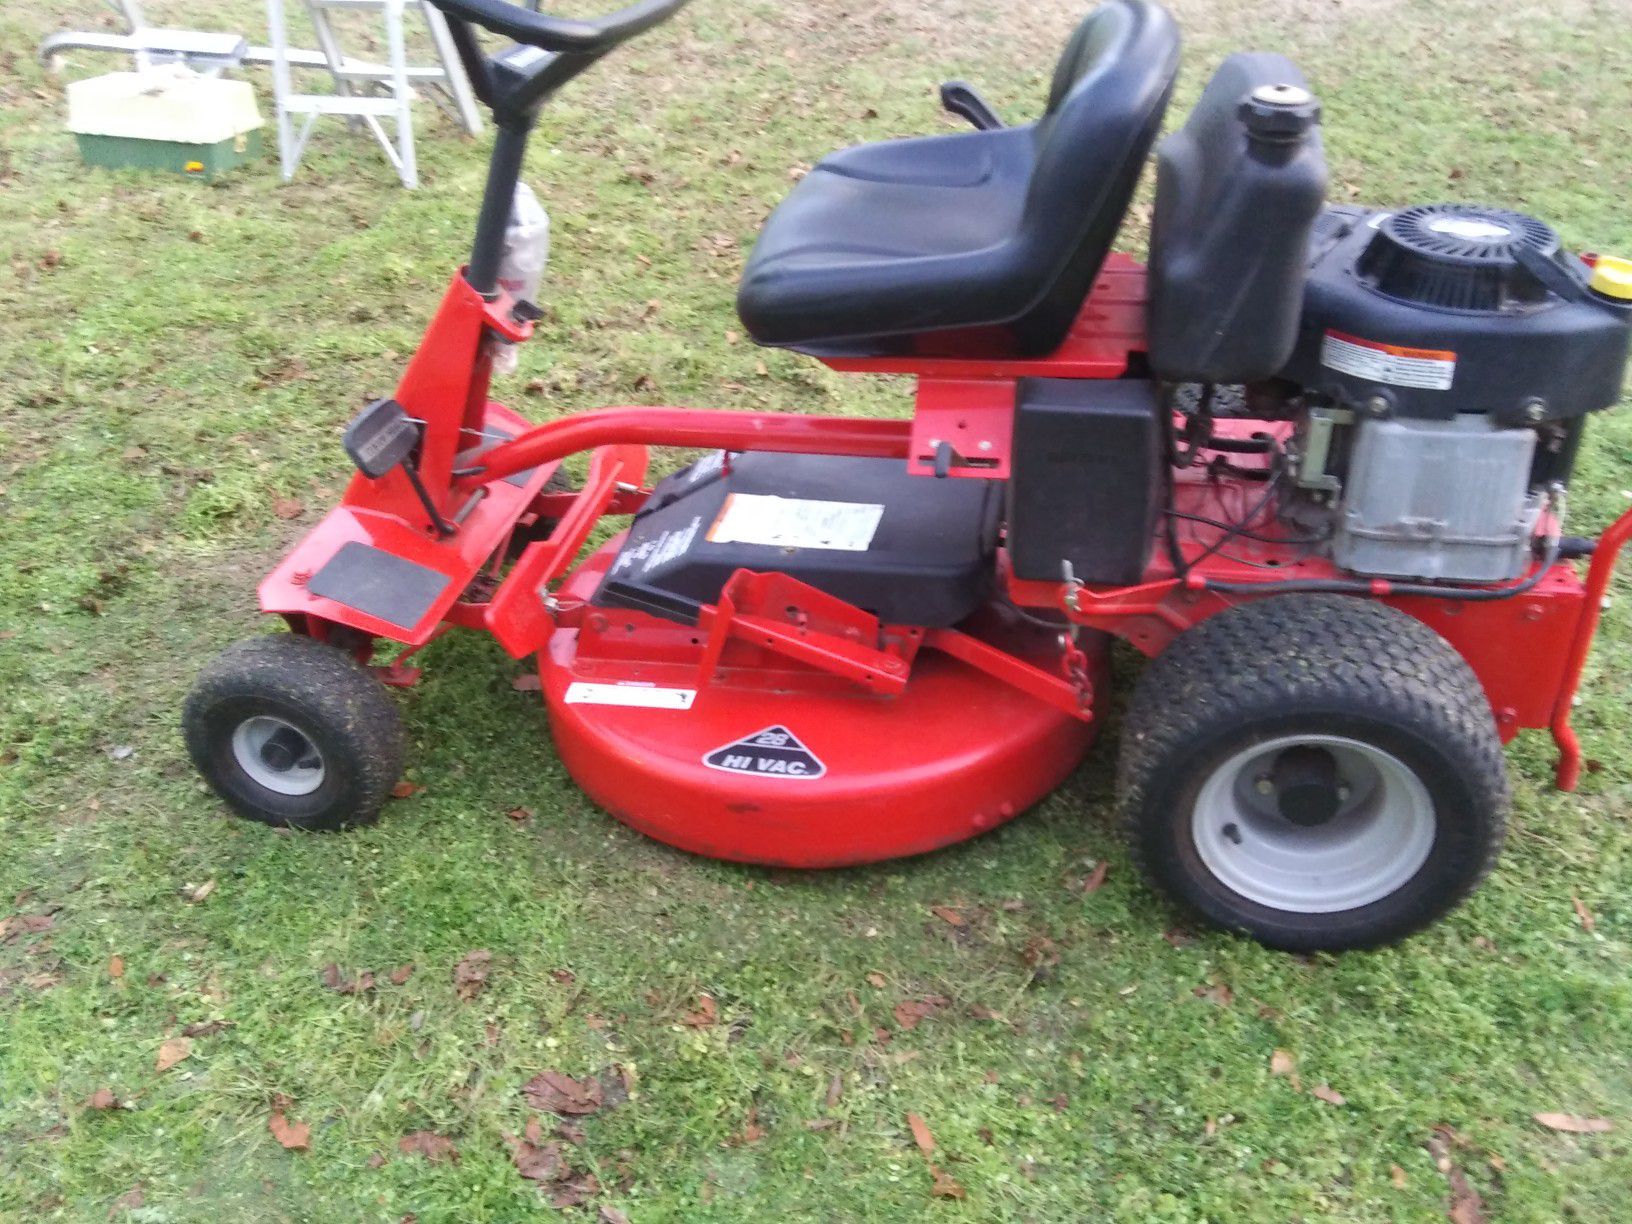 Snapper riding lawn mower 12 and a half horse Briggs and Stratton like new